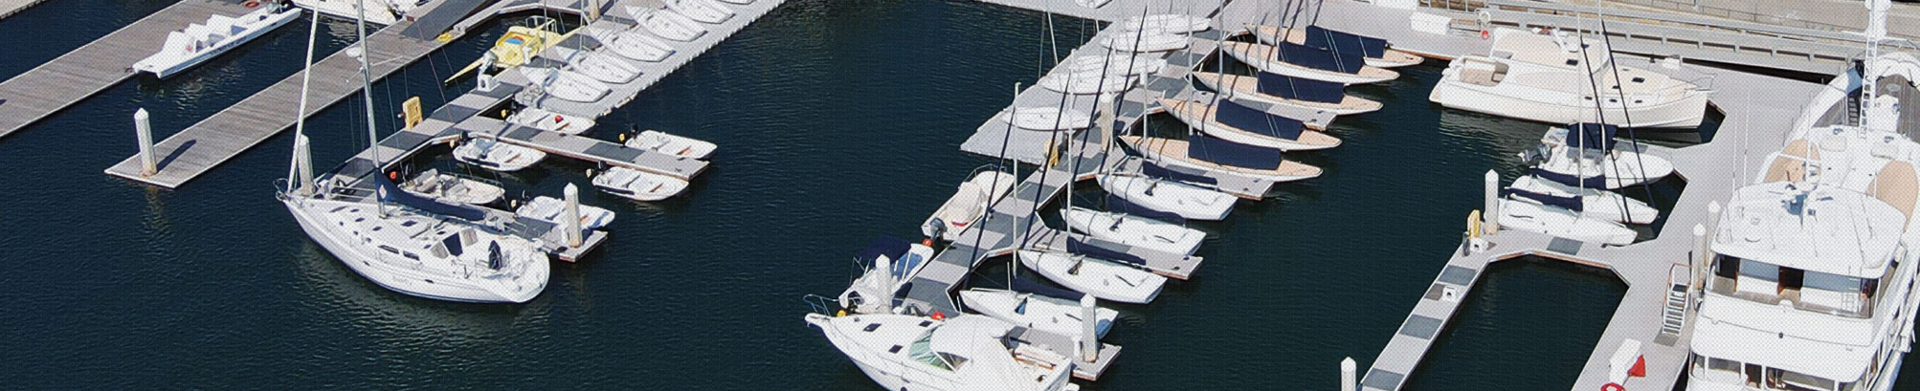 Aerial view of sailing boats docked at a pier